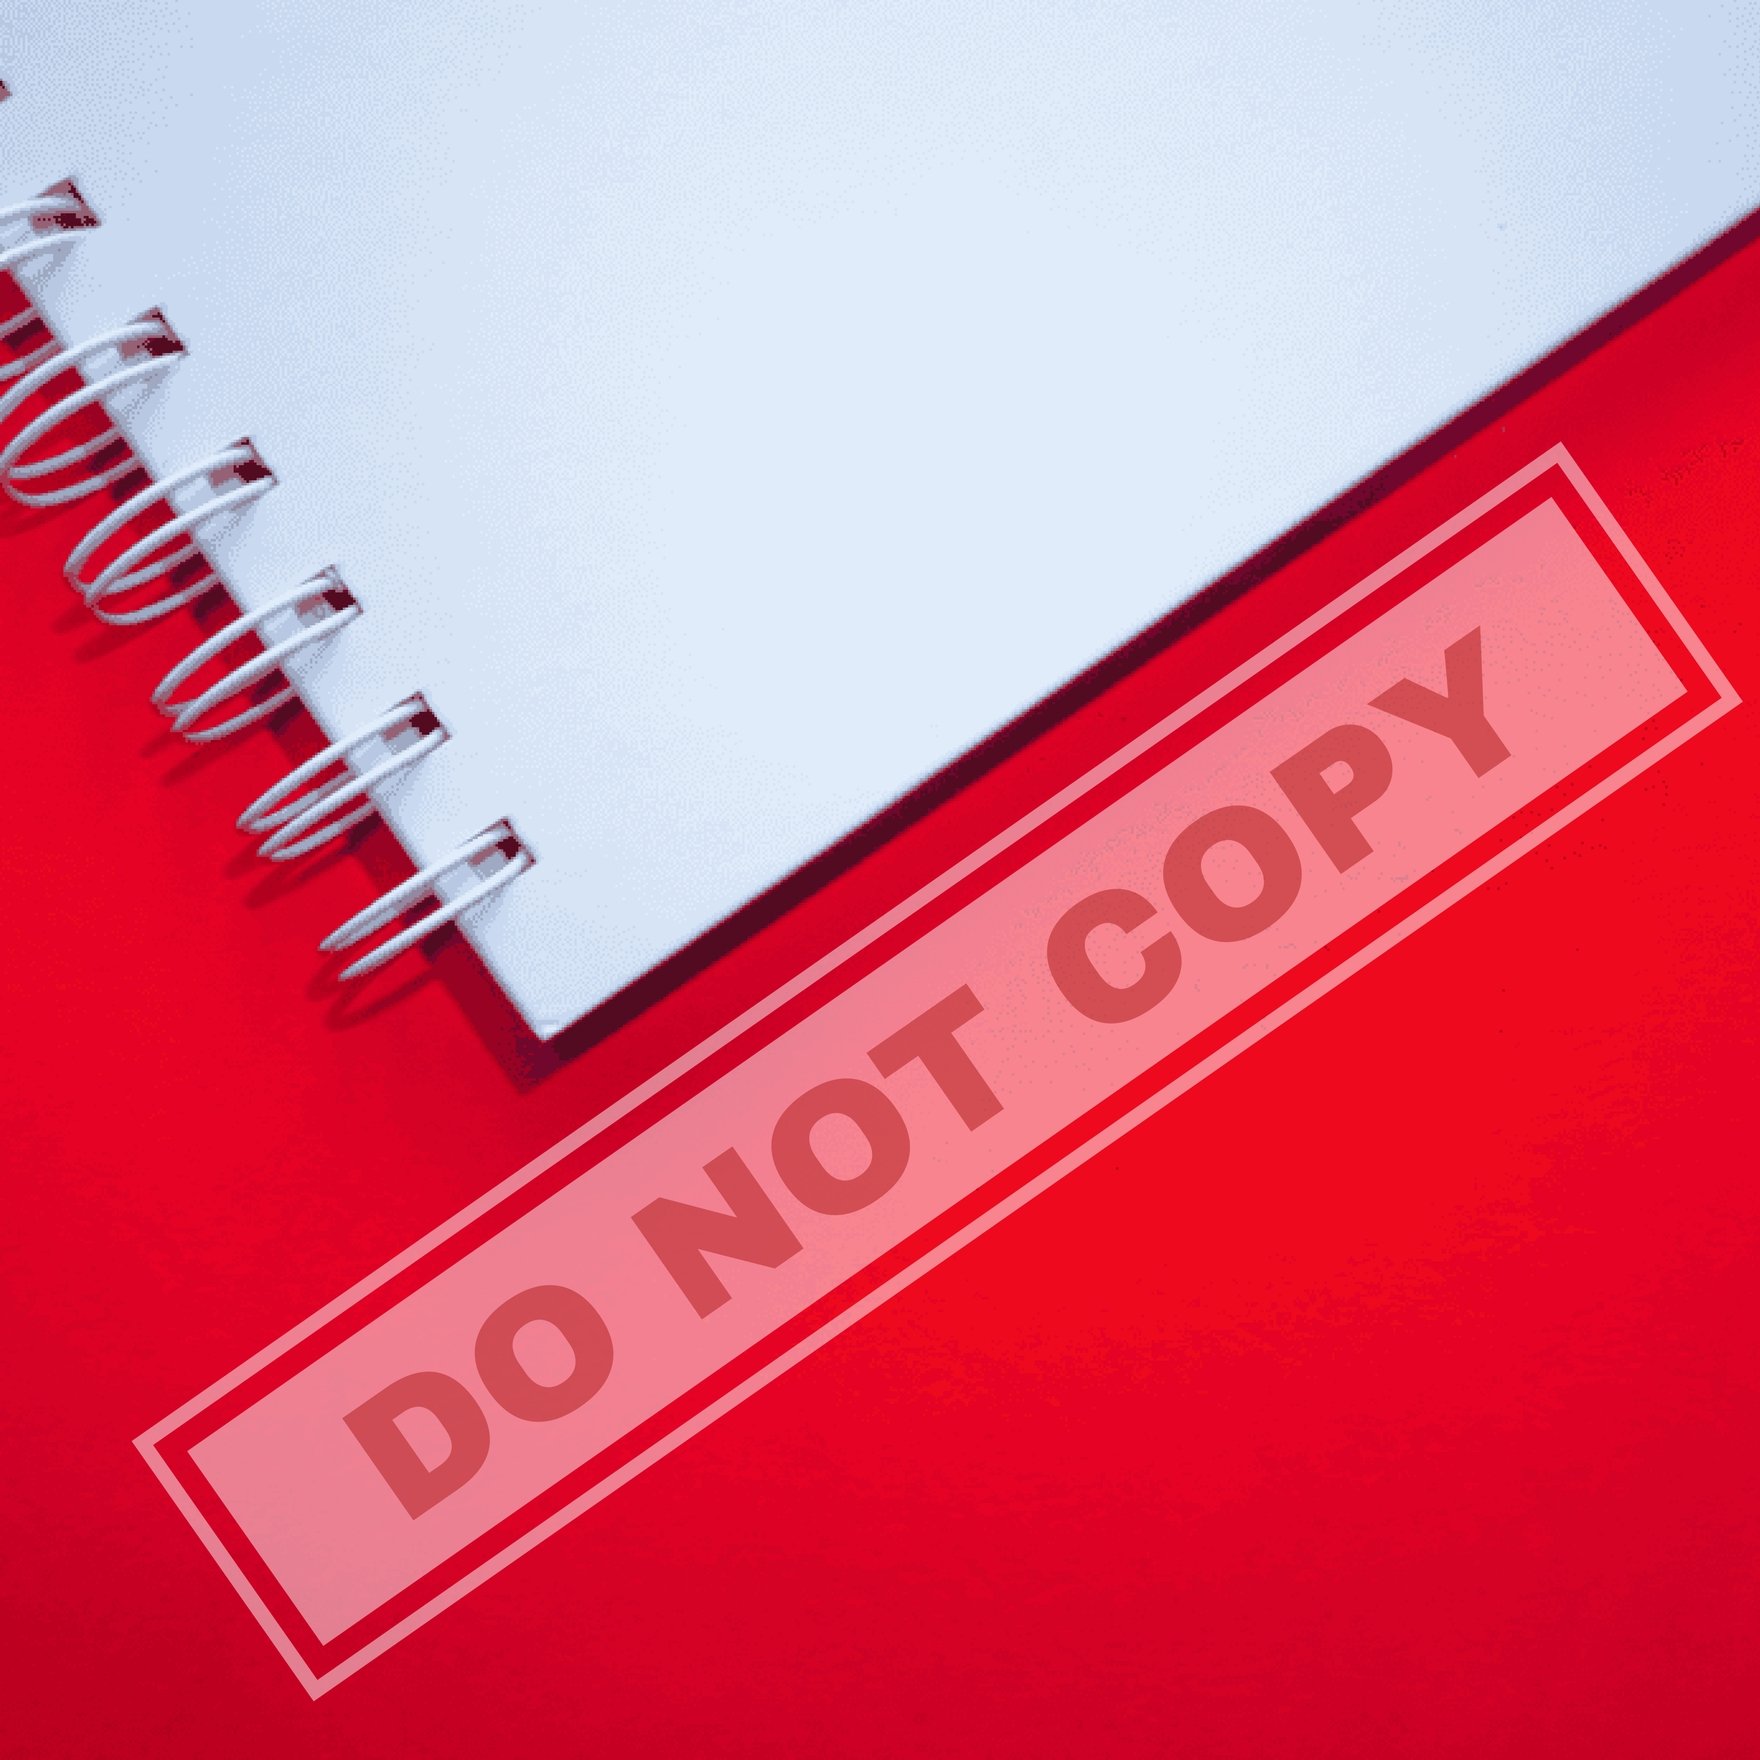 Do Not Copy Watermark Template in PSD, PNG